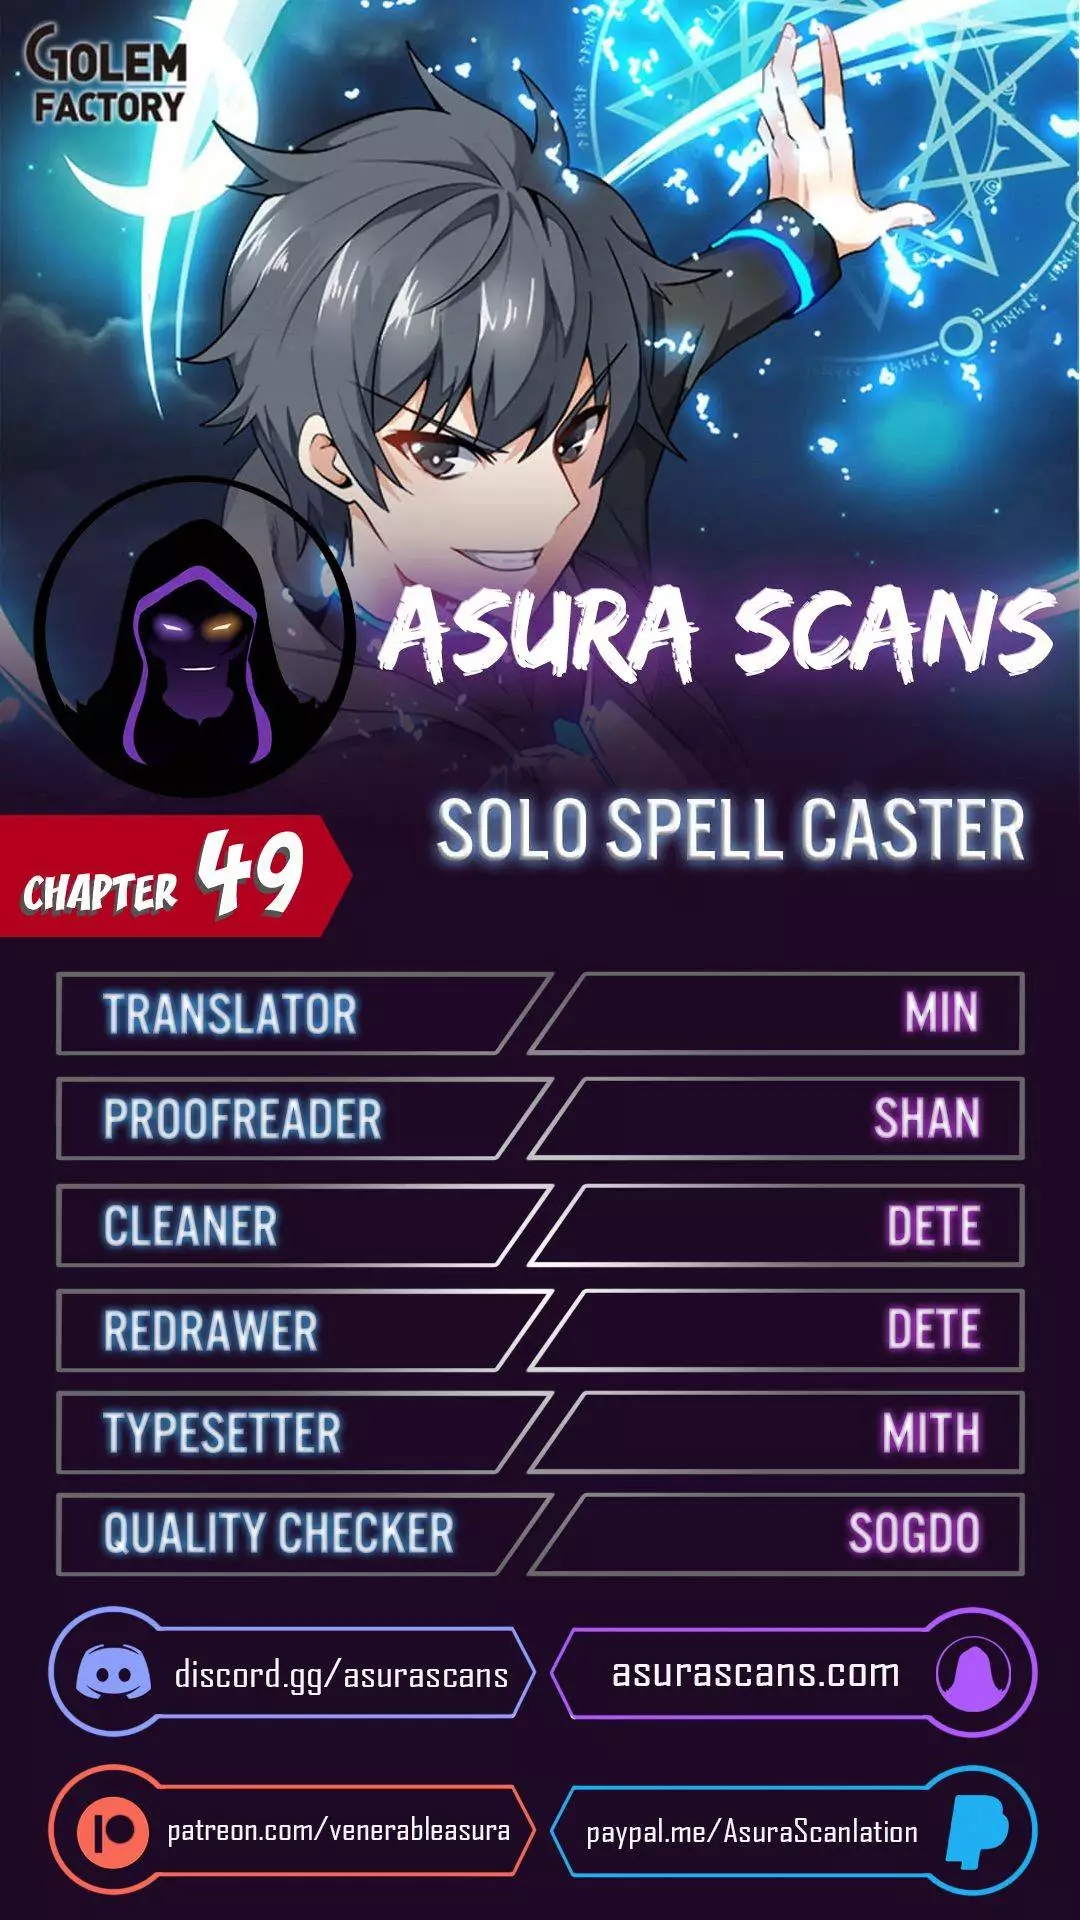 Solo Spell Caster - 49 page 1